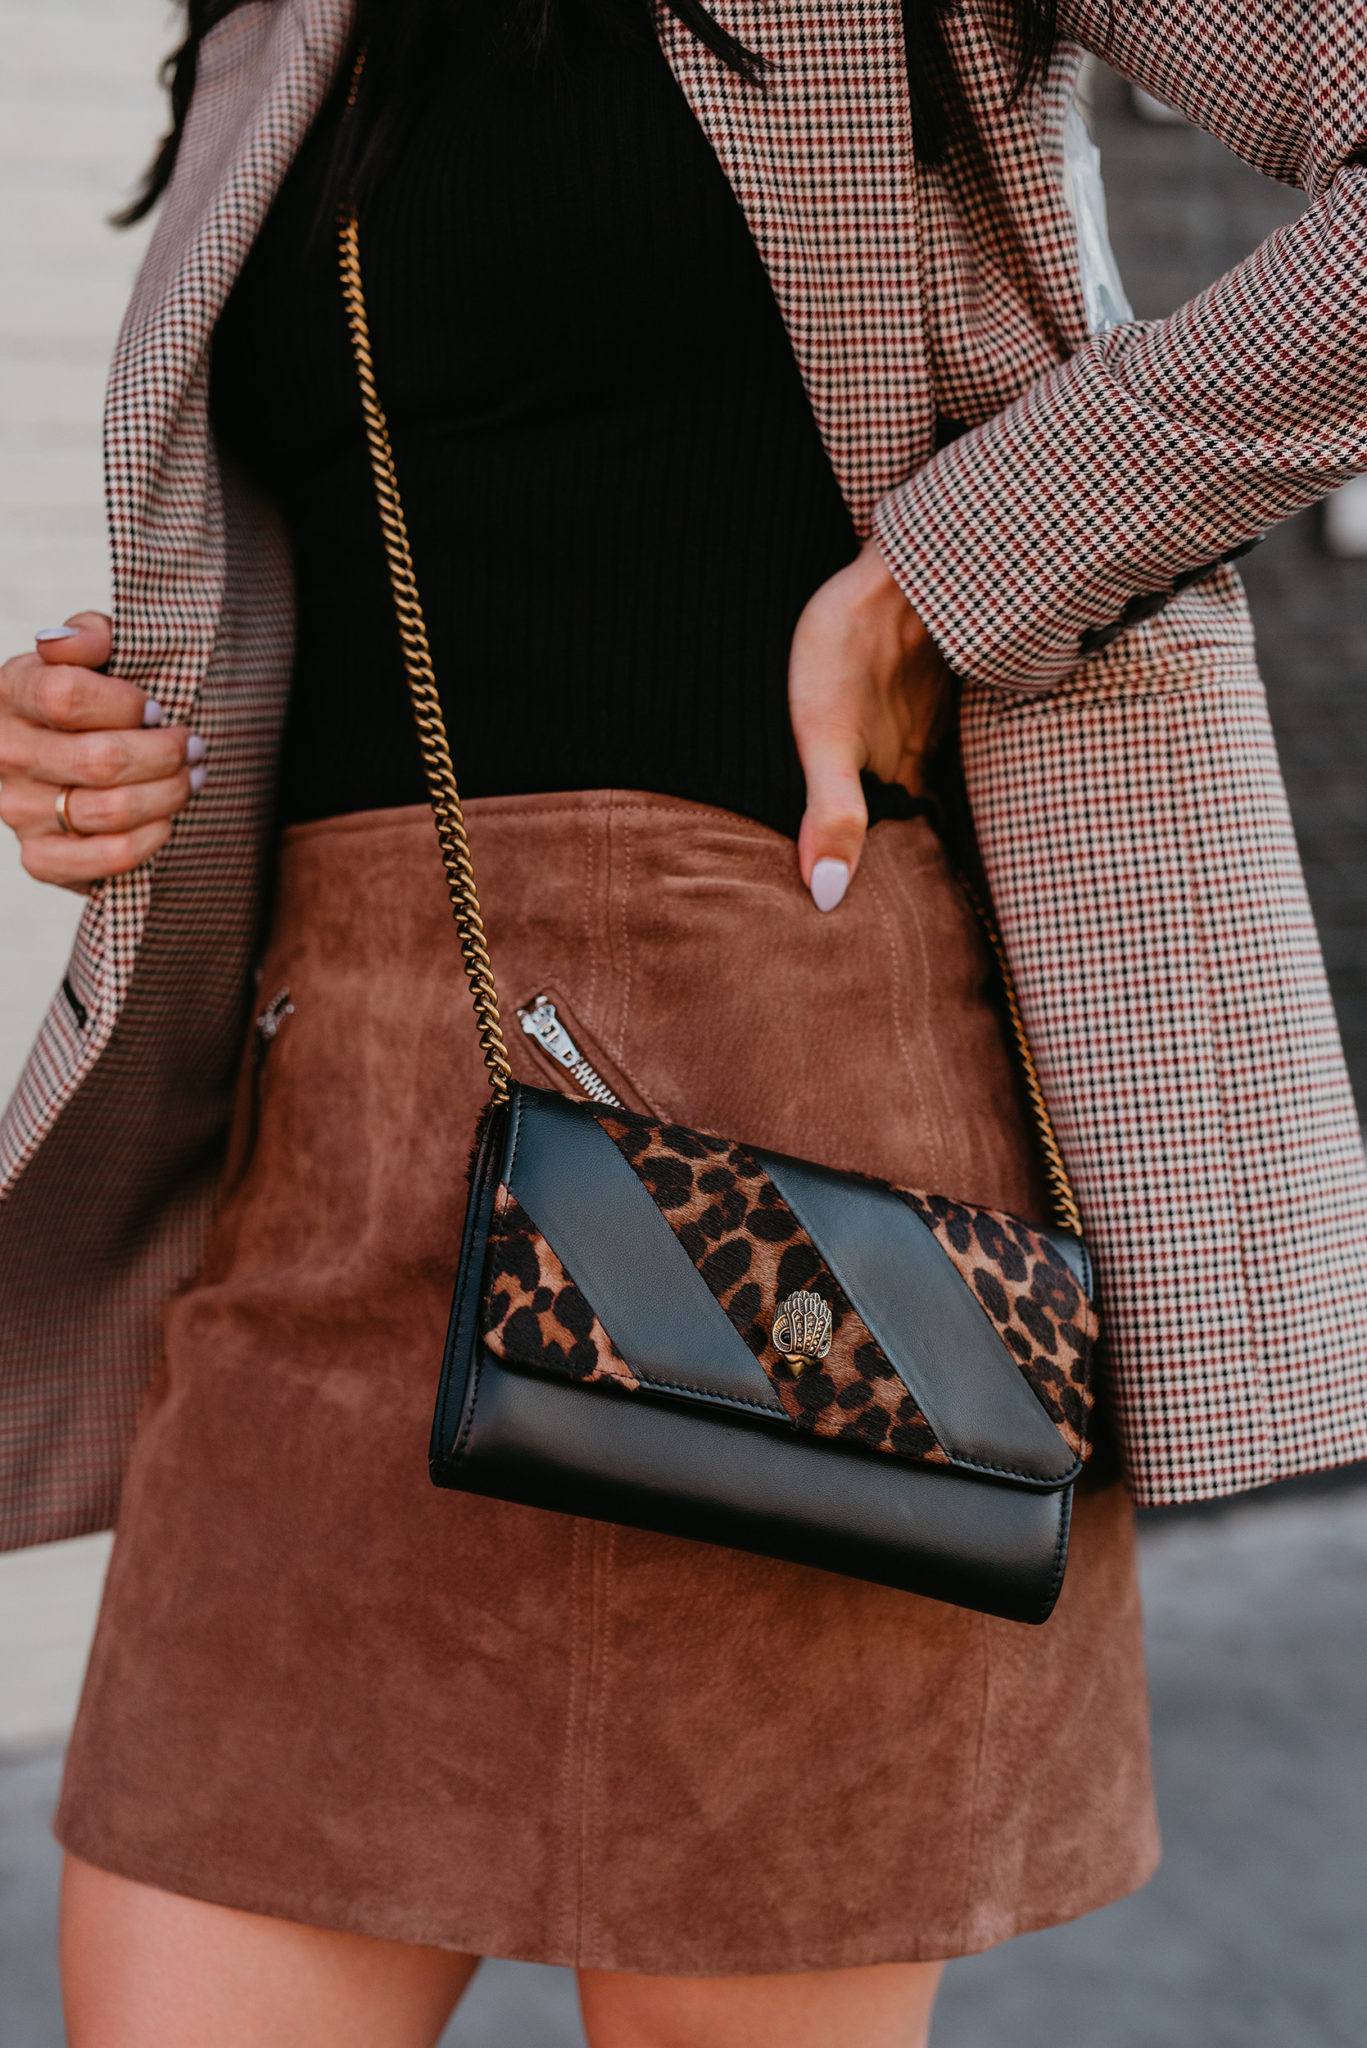 Nordstrom Anniversary Sale: Top Shoes & Accessories Favorites featured by top US fashion blog, Outfits & Outings: image of Kurt Geiger leather crossbody